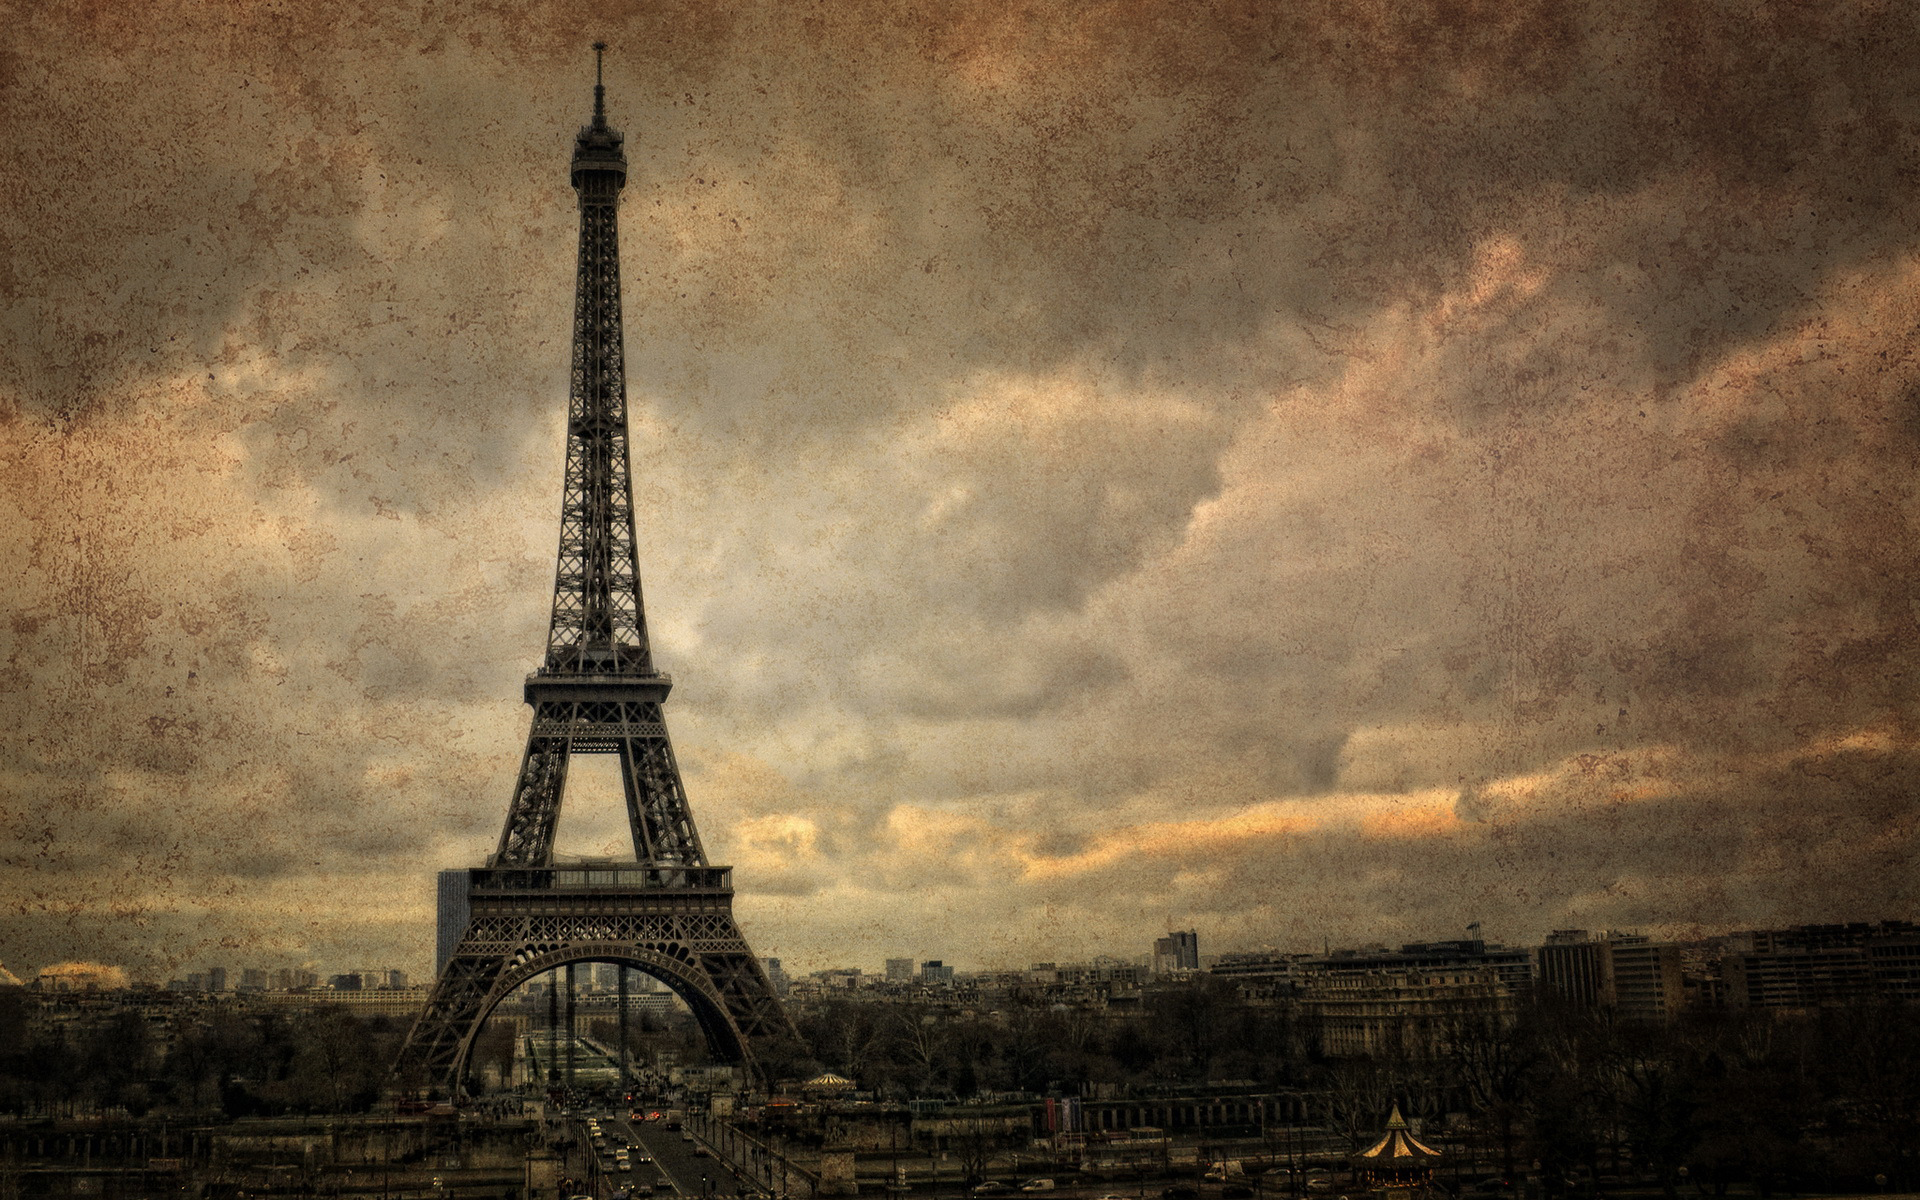 Gallery For Gt Vintage Eiffel Tower Wallpaper